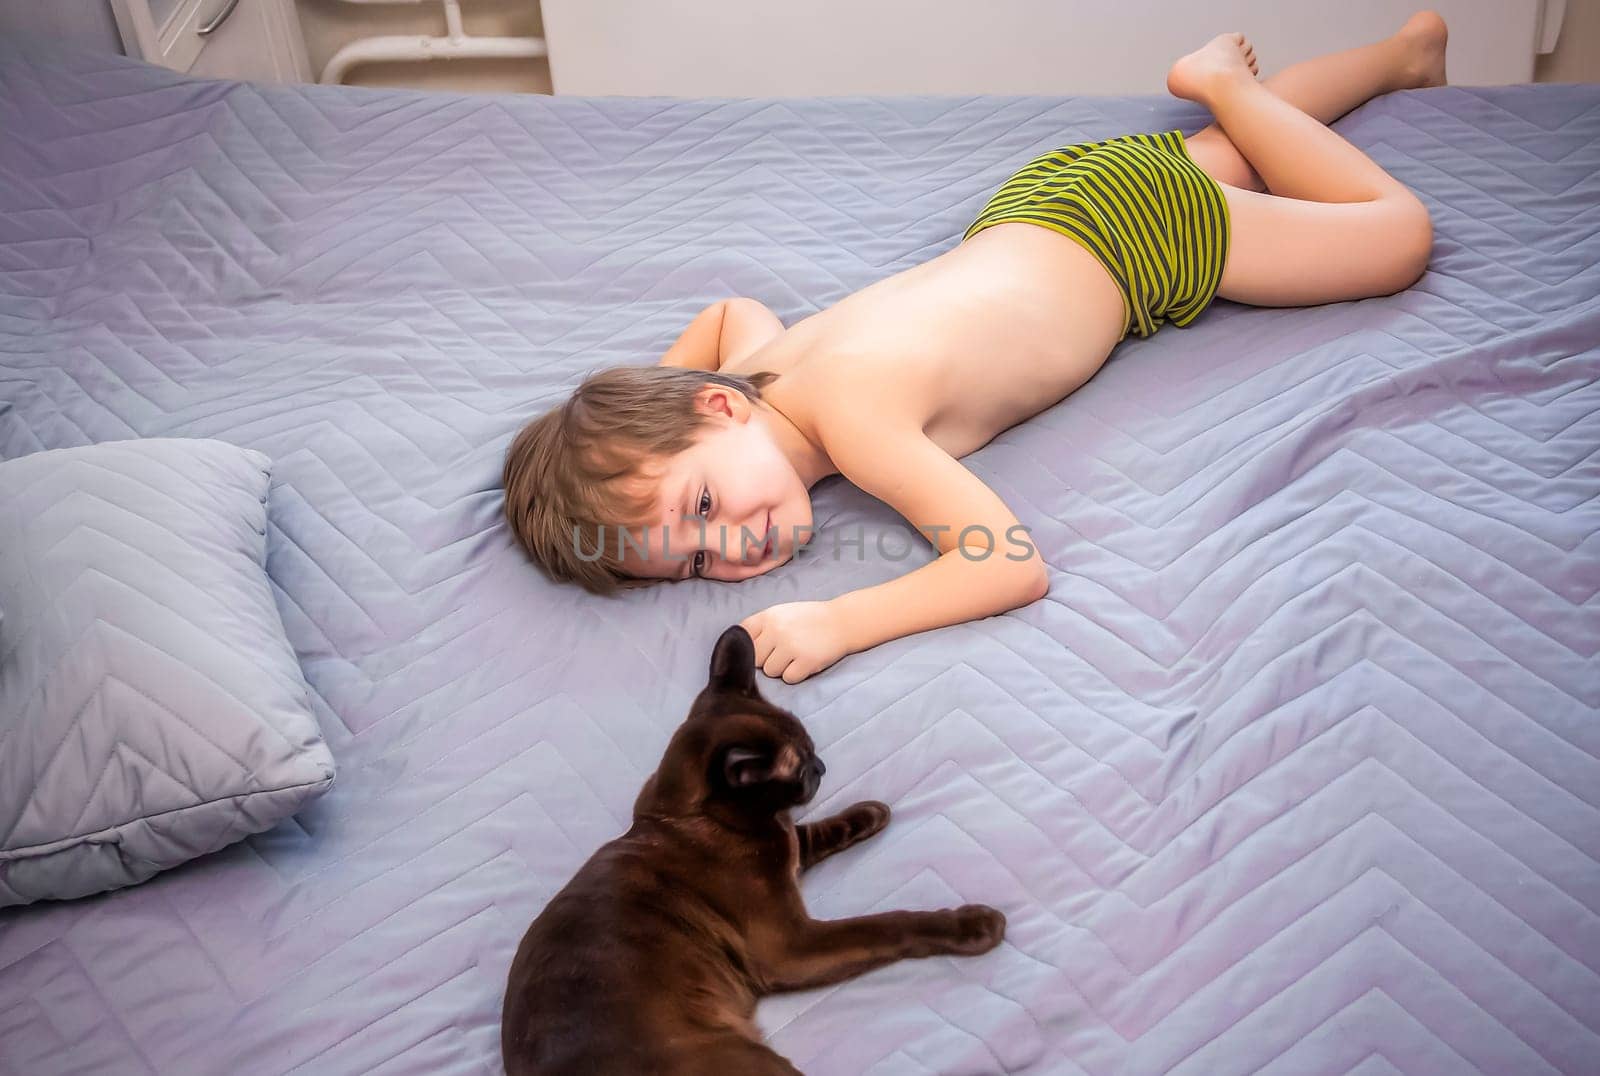 Cute boy without a T-shirt. A blond-haired boy is lying on the bed in a natural setting, and a cat is next to him. The face expresses natural emotions.  by Alina_Lebed